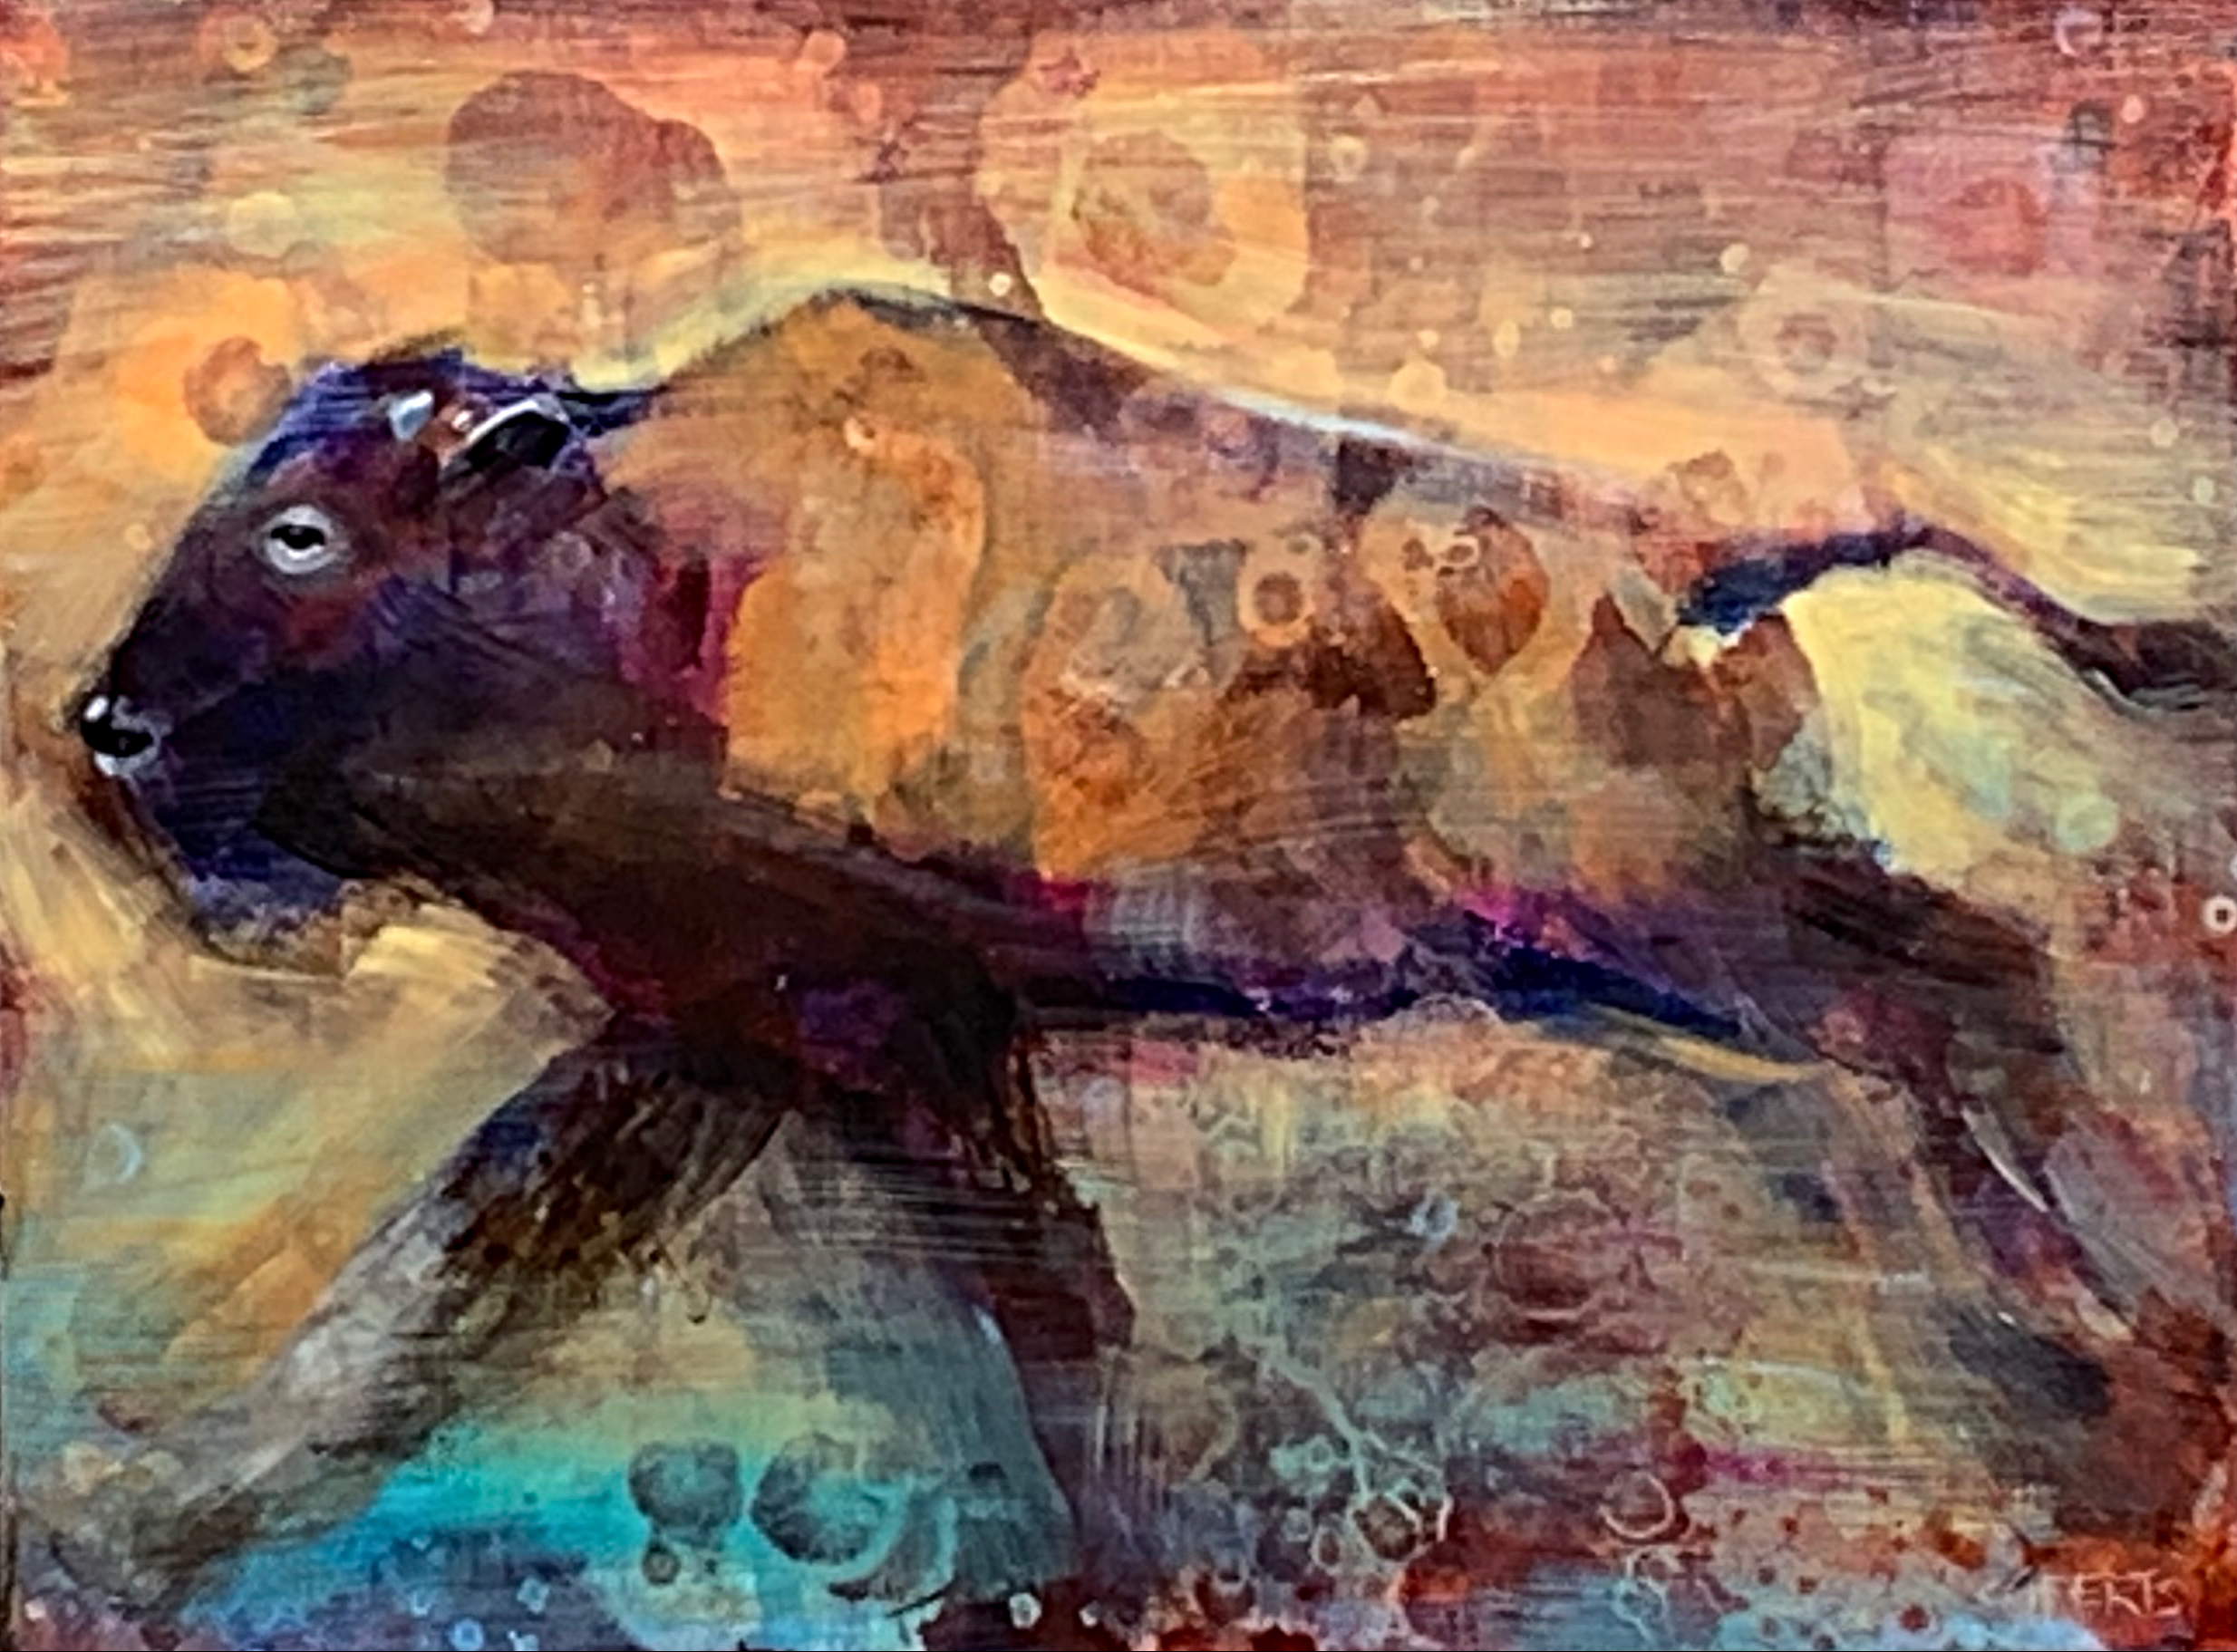 Resilience, acrylic bison painting by Connie Geerts | Effusion Art Gallery + Cast Glass Studio, Invermere BC